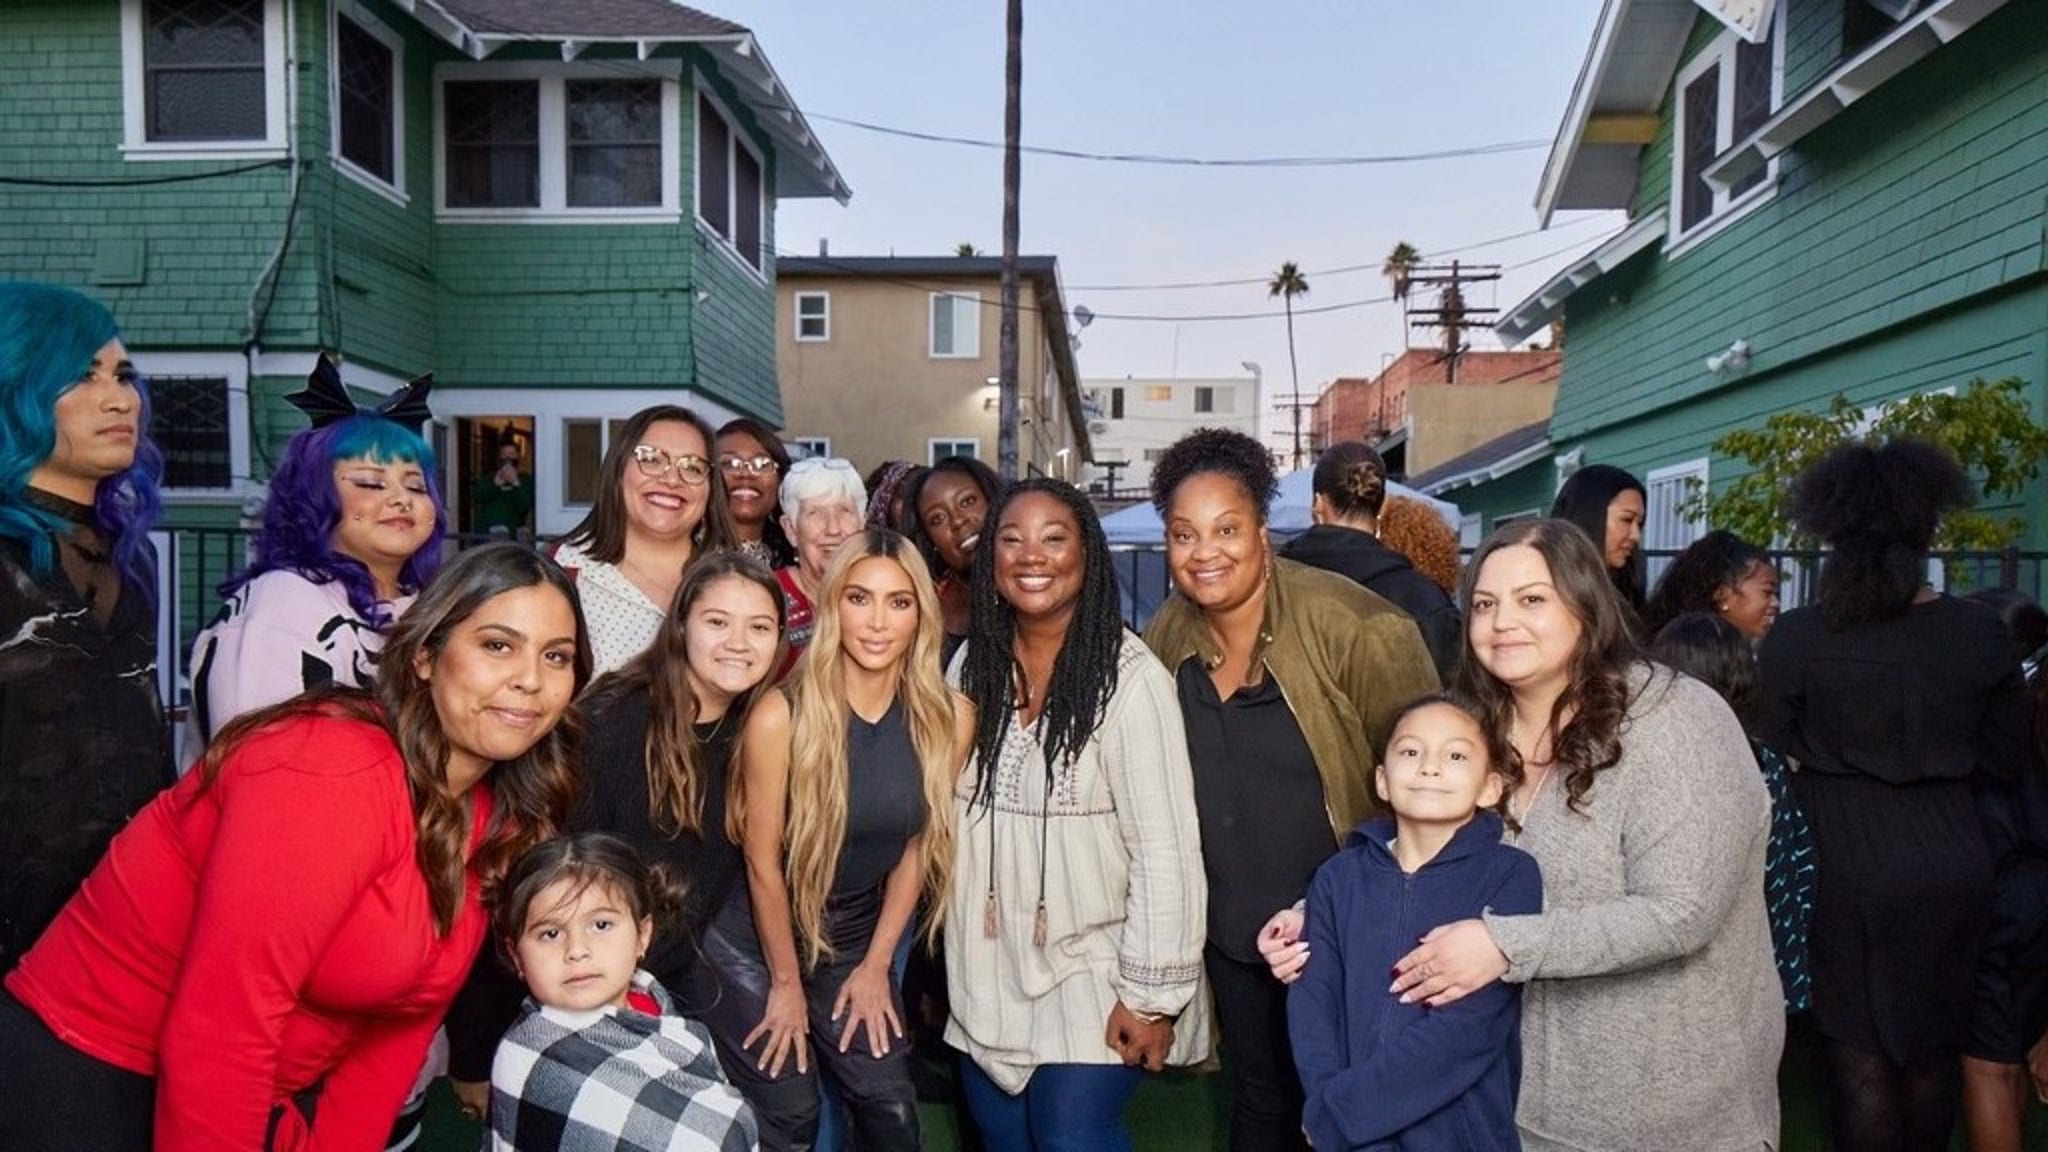 The Kardashians bring holiday cheer, makeovers and donations for Alexandria House